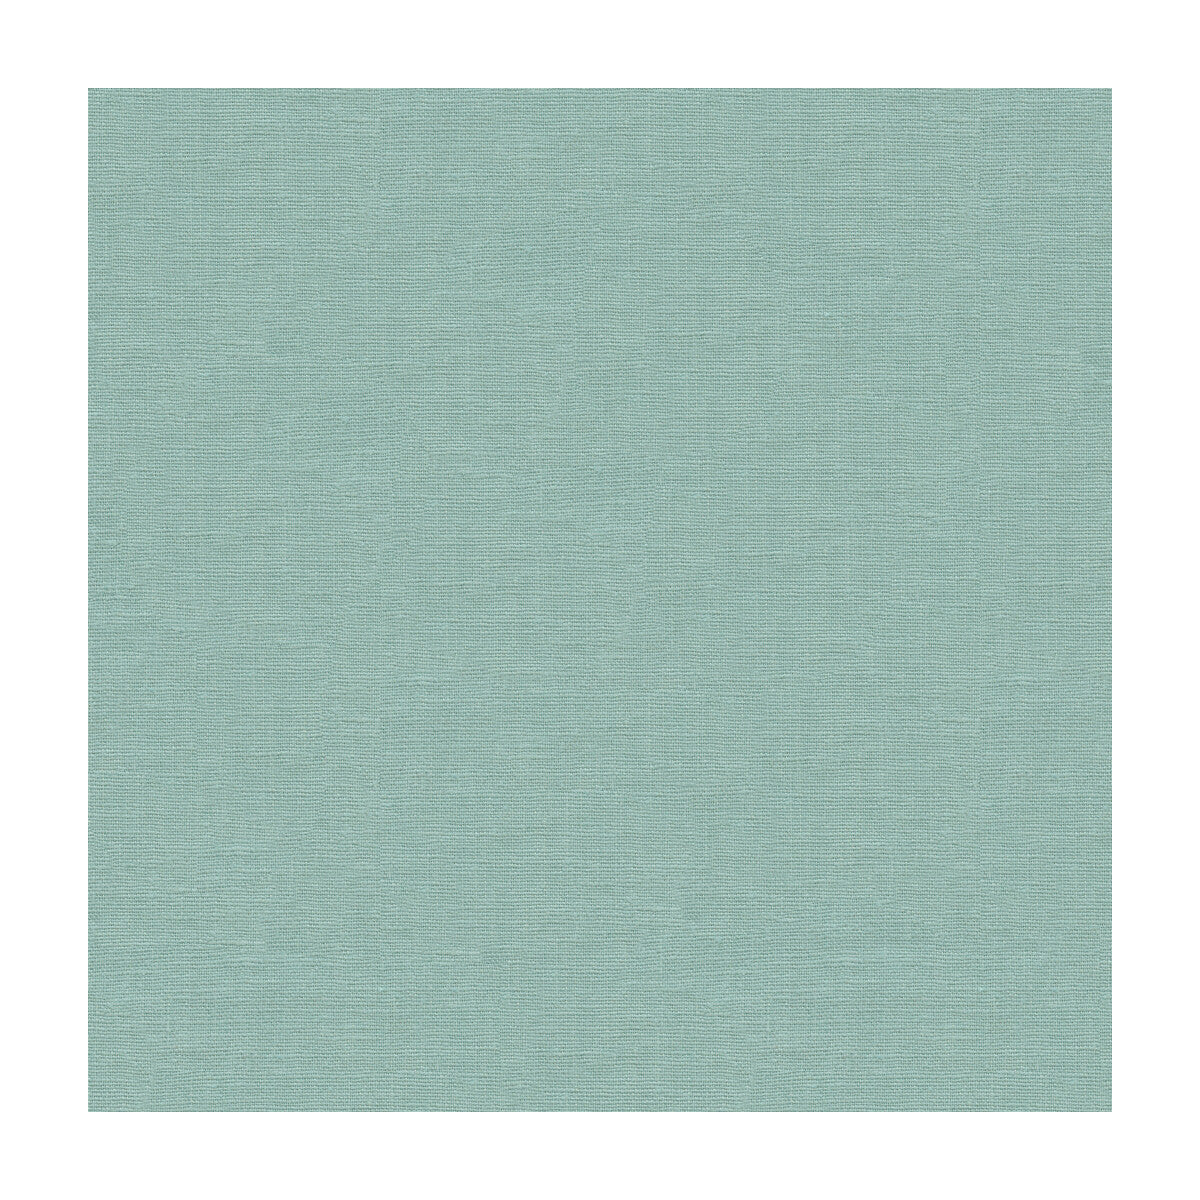 Dublin fabric in spa color - pattern 32344.15.0 - by Kravet Basics in the Perfect Plains collection